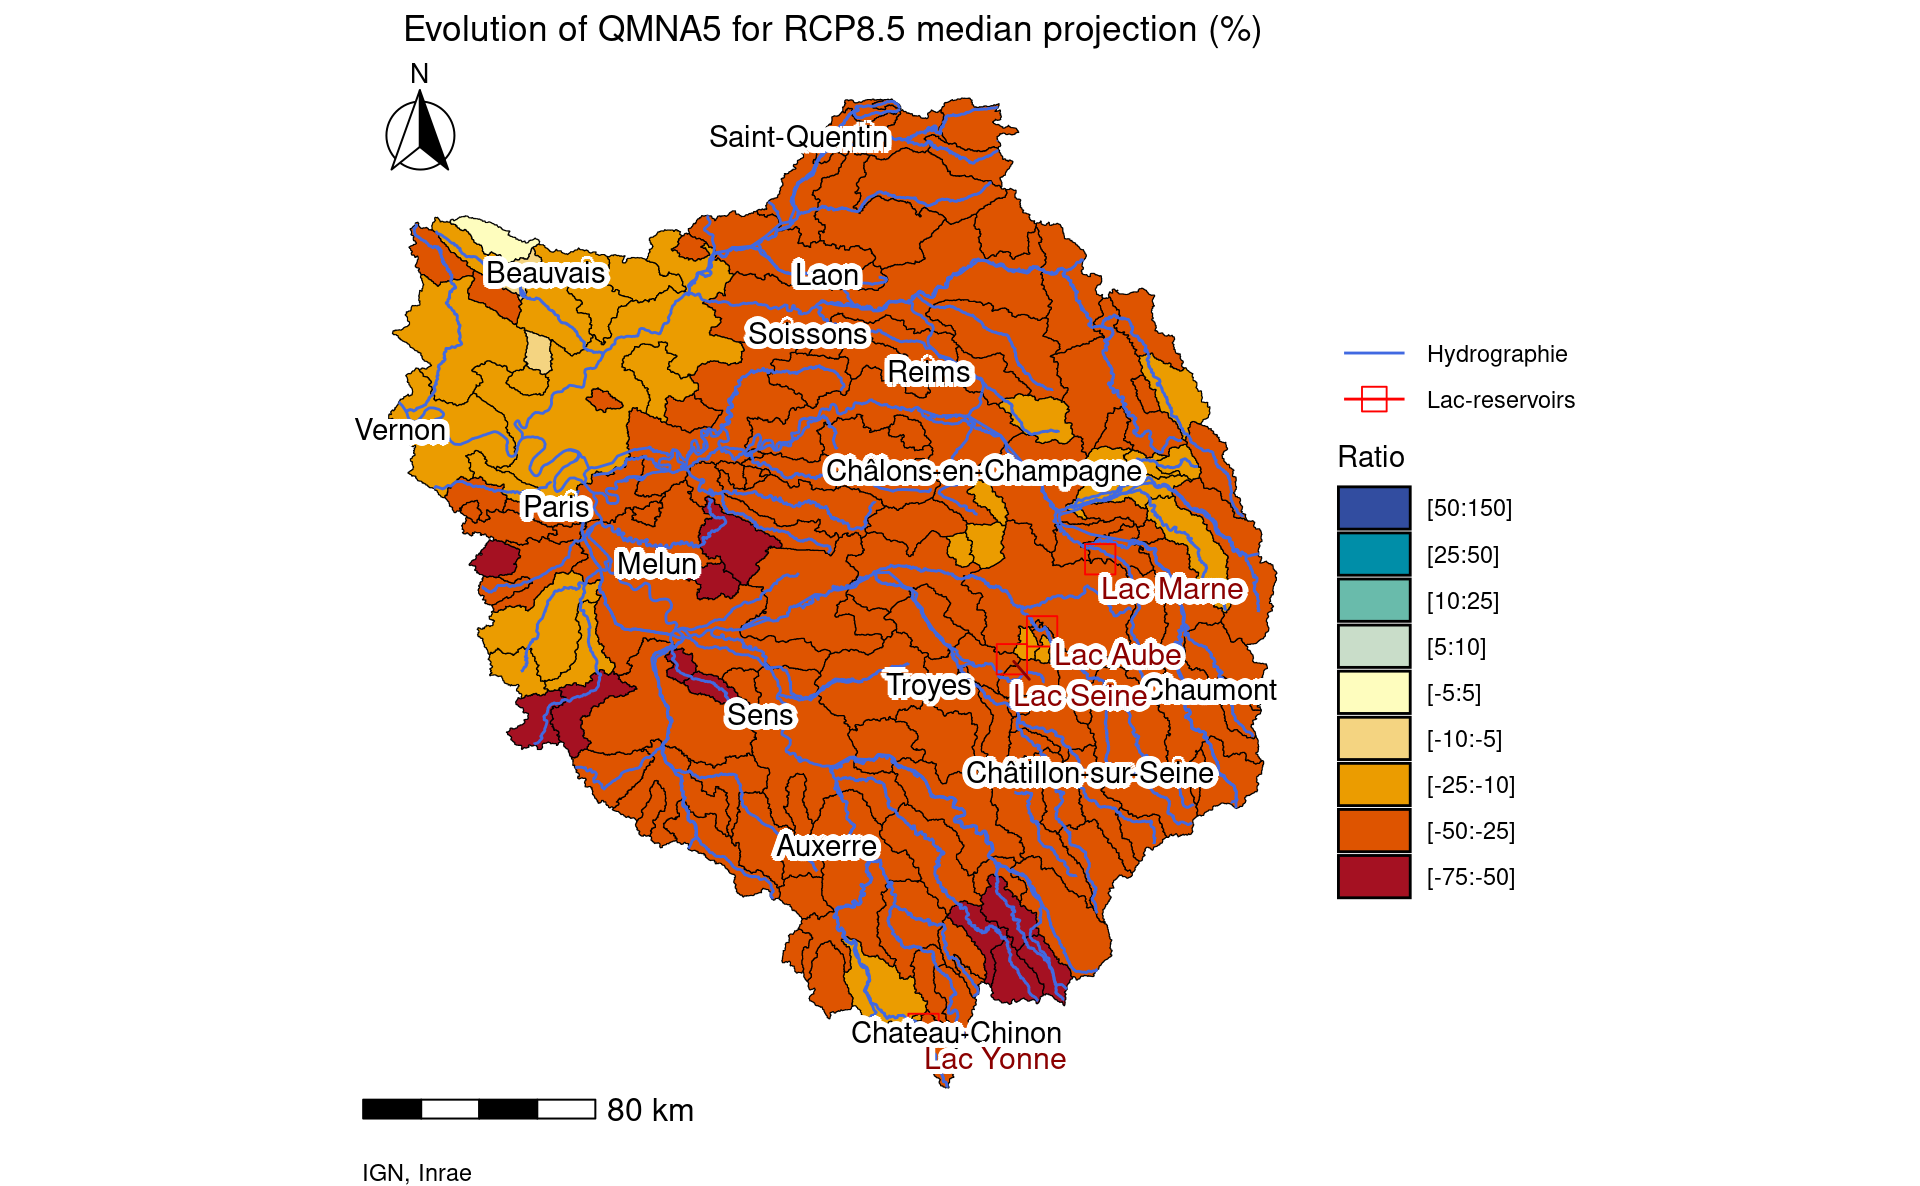 Map of median scenario evolution of indicator QMNA5 between 1976-2005 and 2071-2100 for RCP 8.5